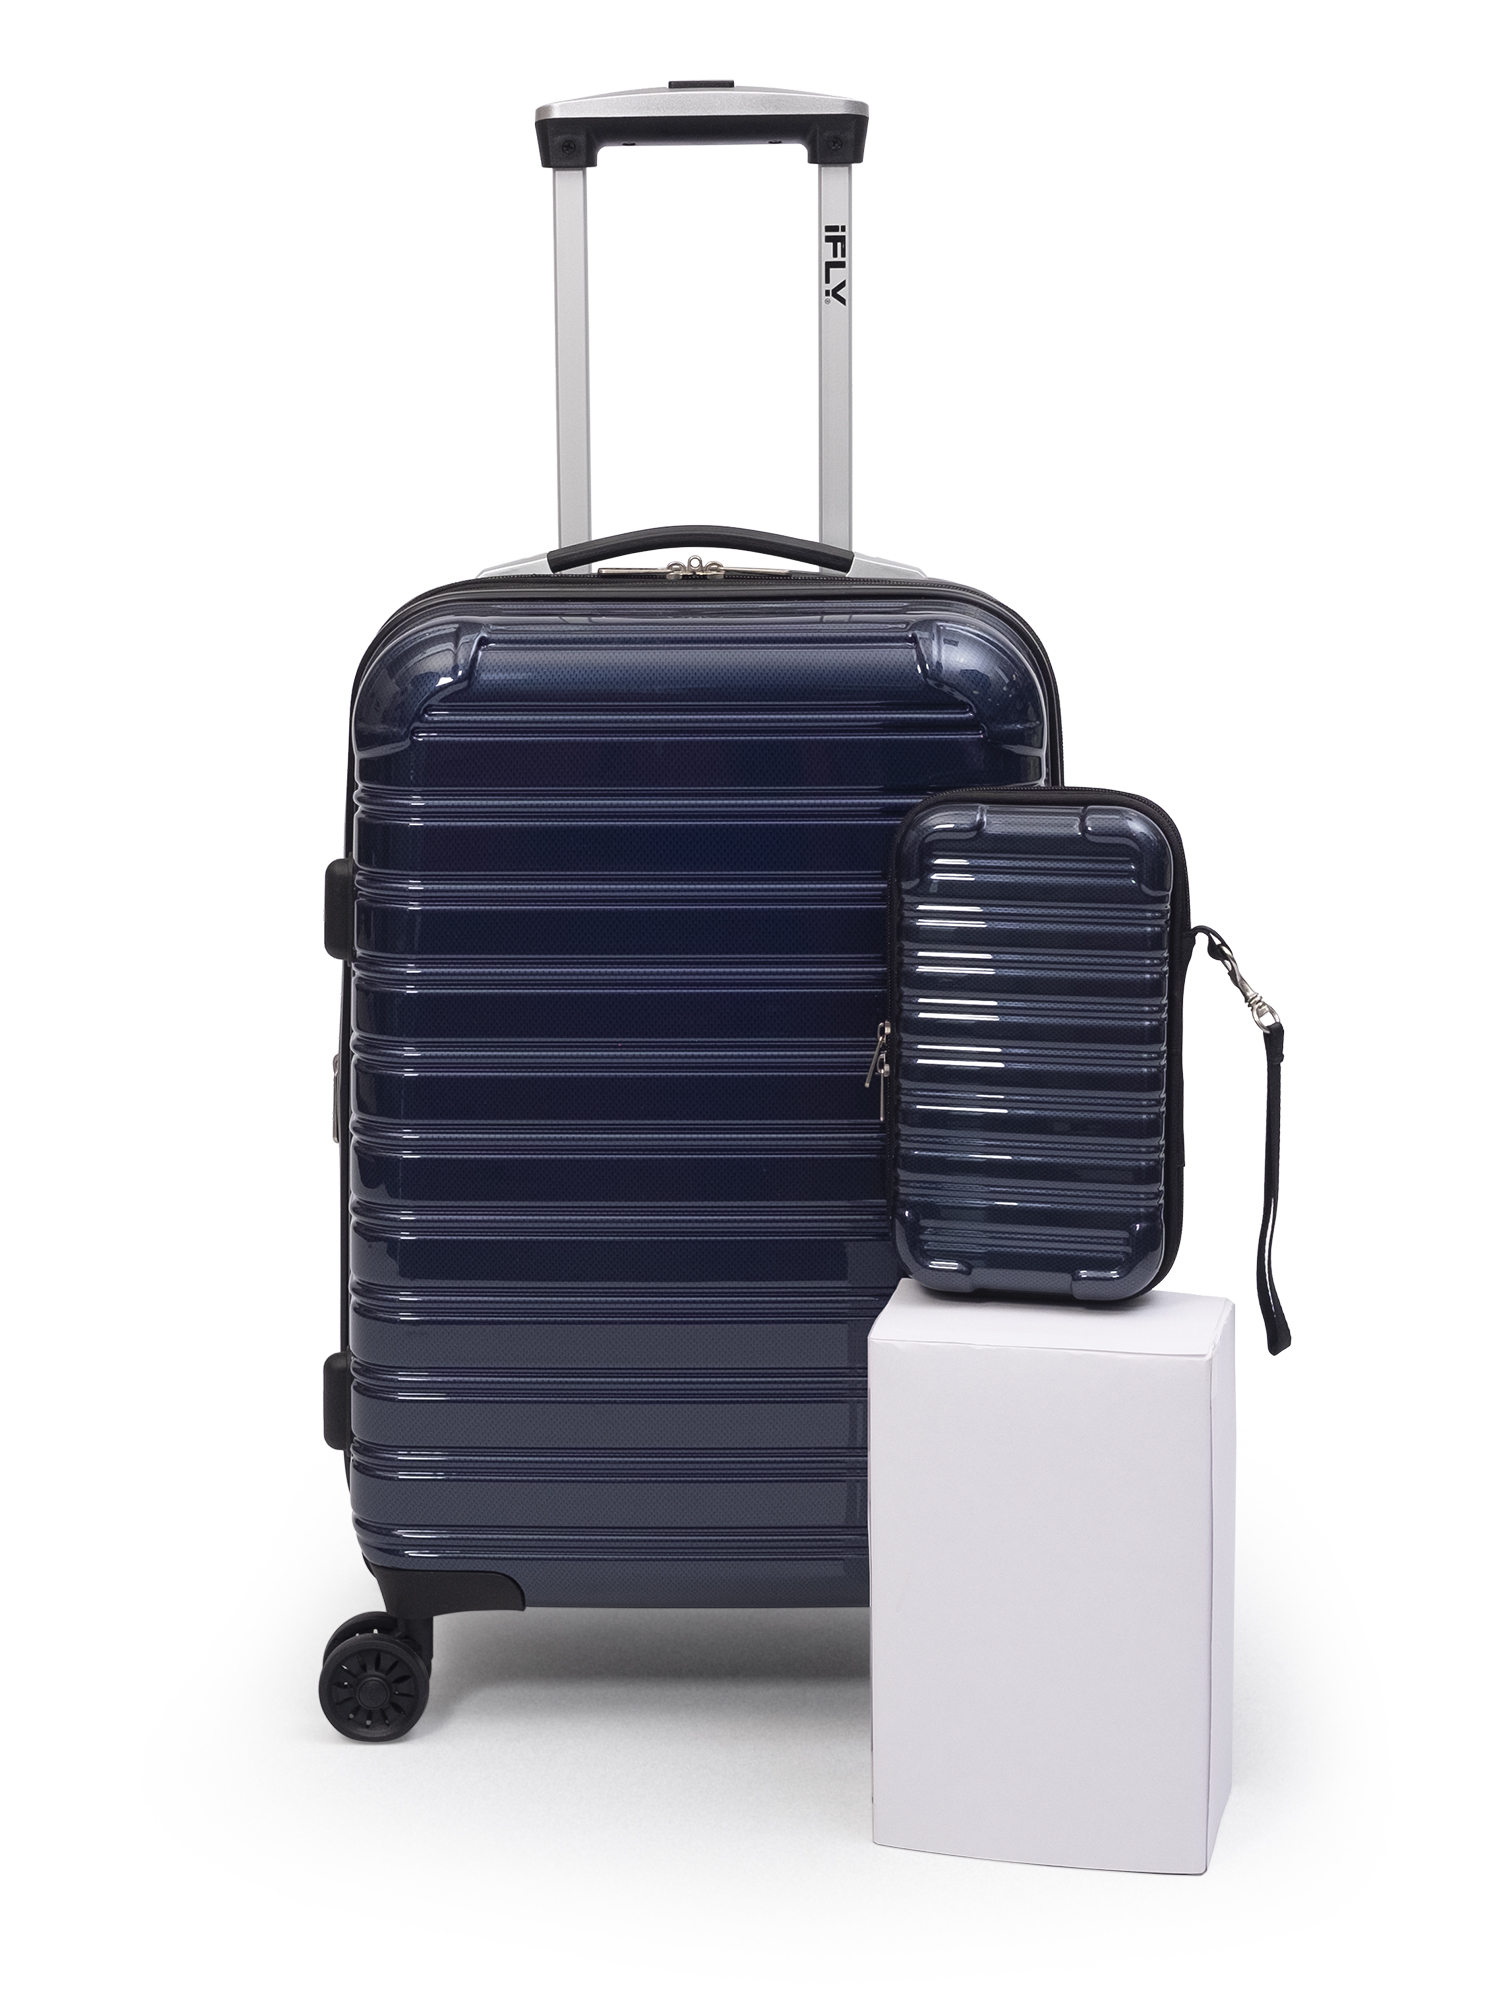 iFLY Online Exclusive Hard Sided Luggage Fibertech 20" & Travel Case - image 1 of 9